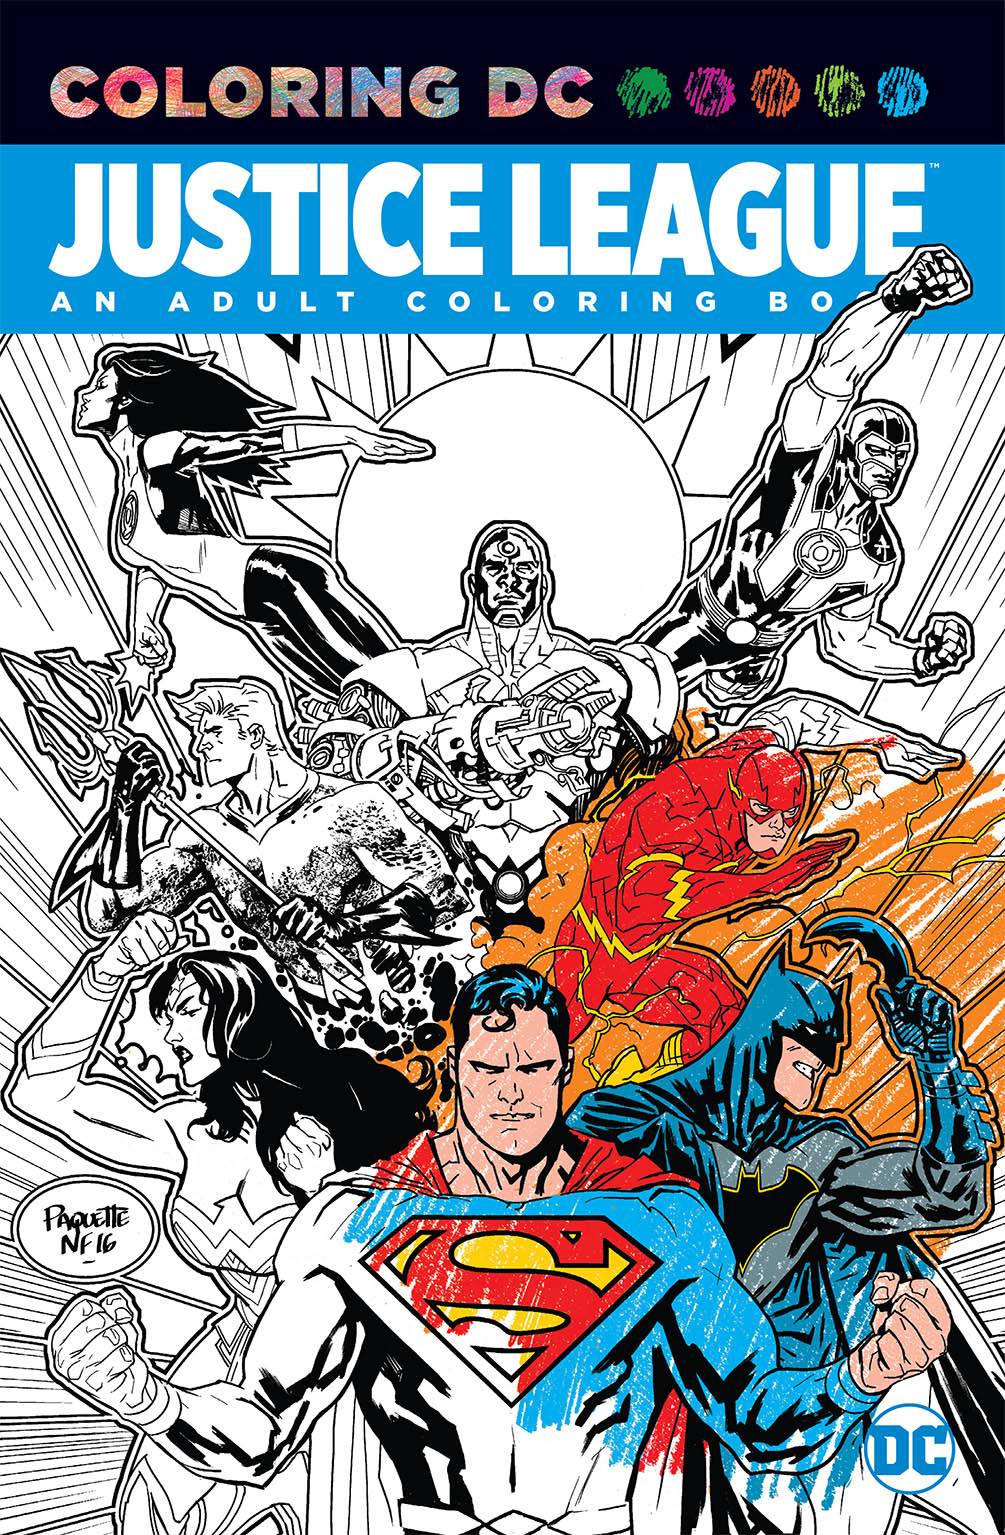 Justice League an Adult Coloring Book